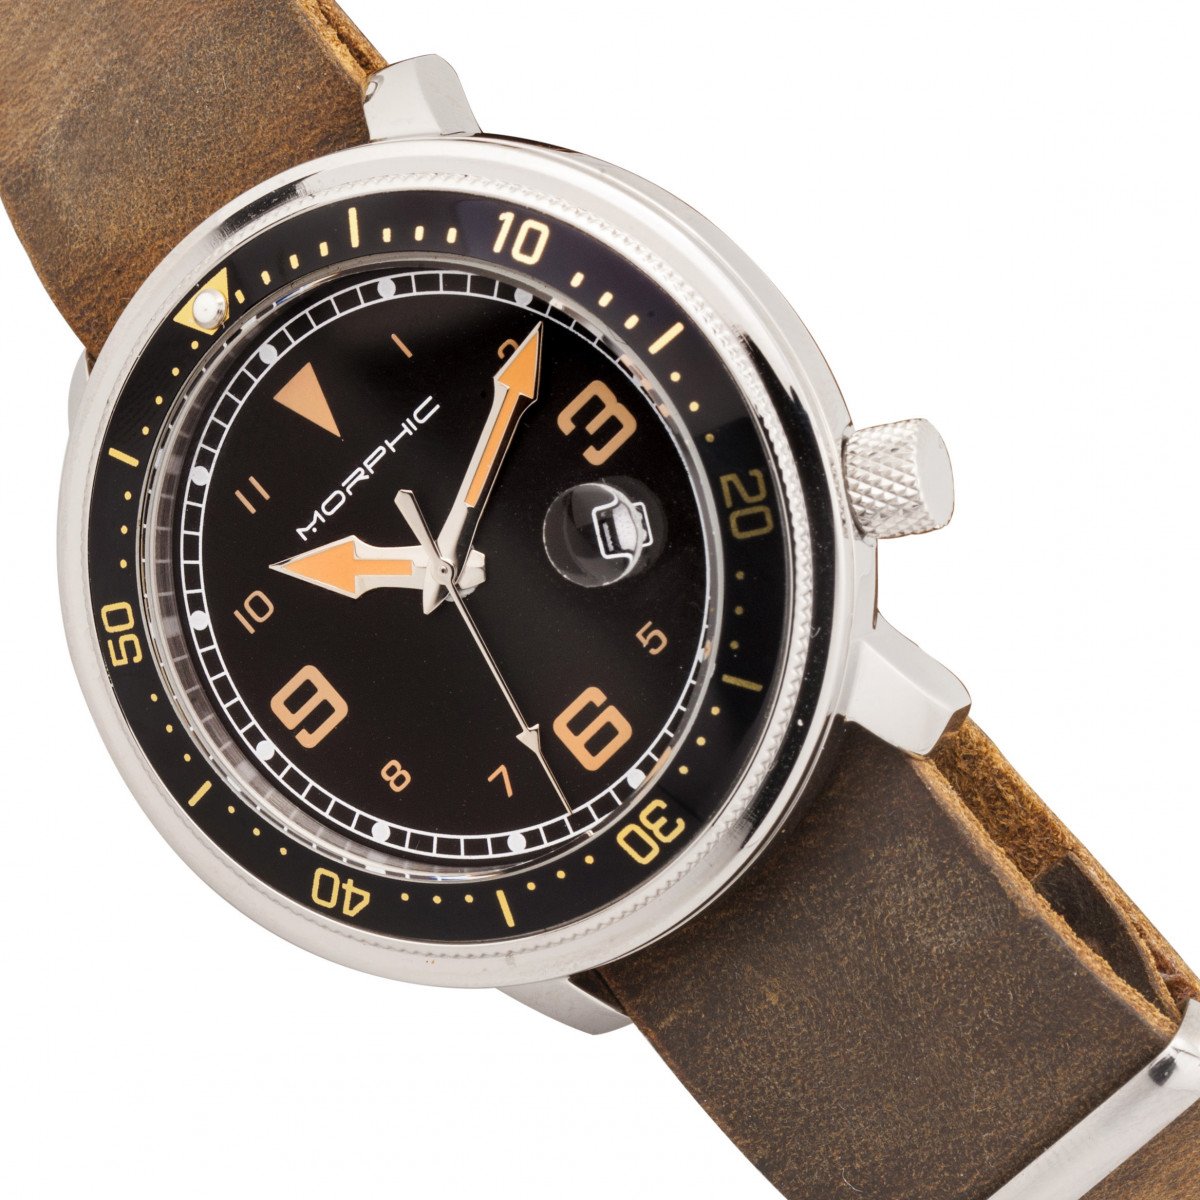 Morphic M74 Series Leather-Band Watch w/Magnified Date Display - Brown/Black & Gold/Black - MPH7411